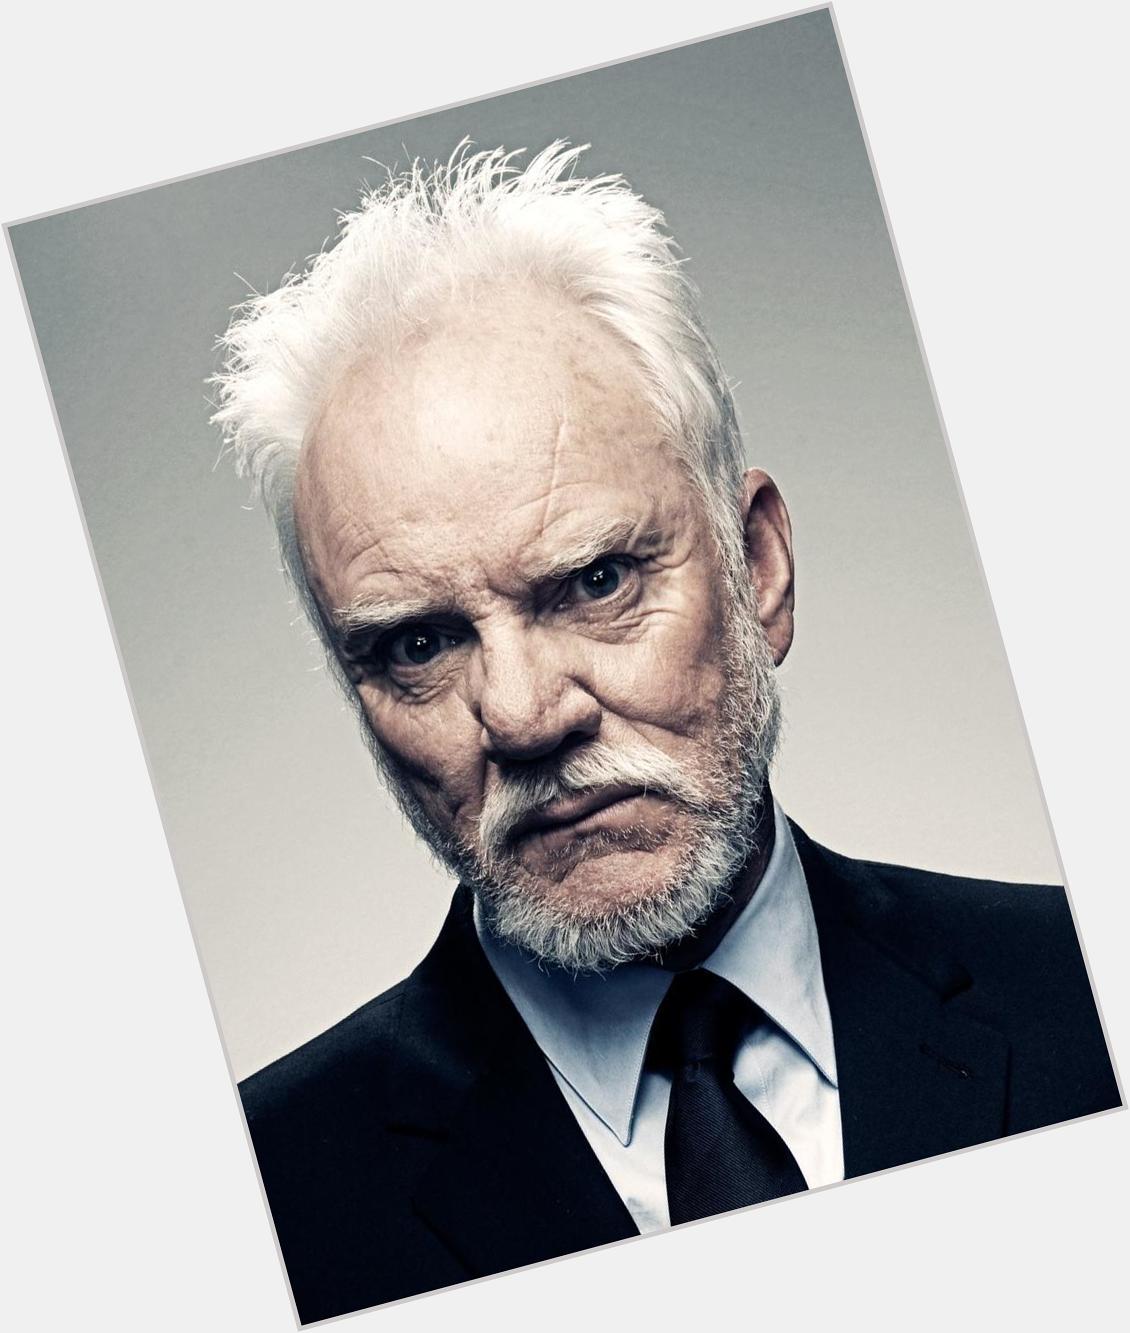 Happy birthday to Malcolm McDowell. 72 years young today! What do you think is his greatest film? 